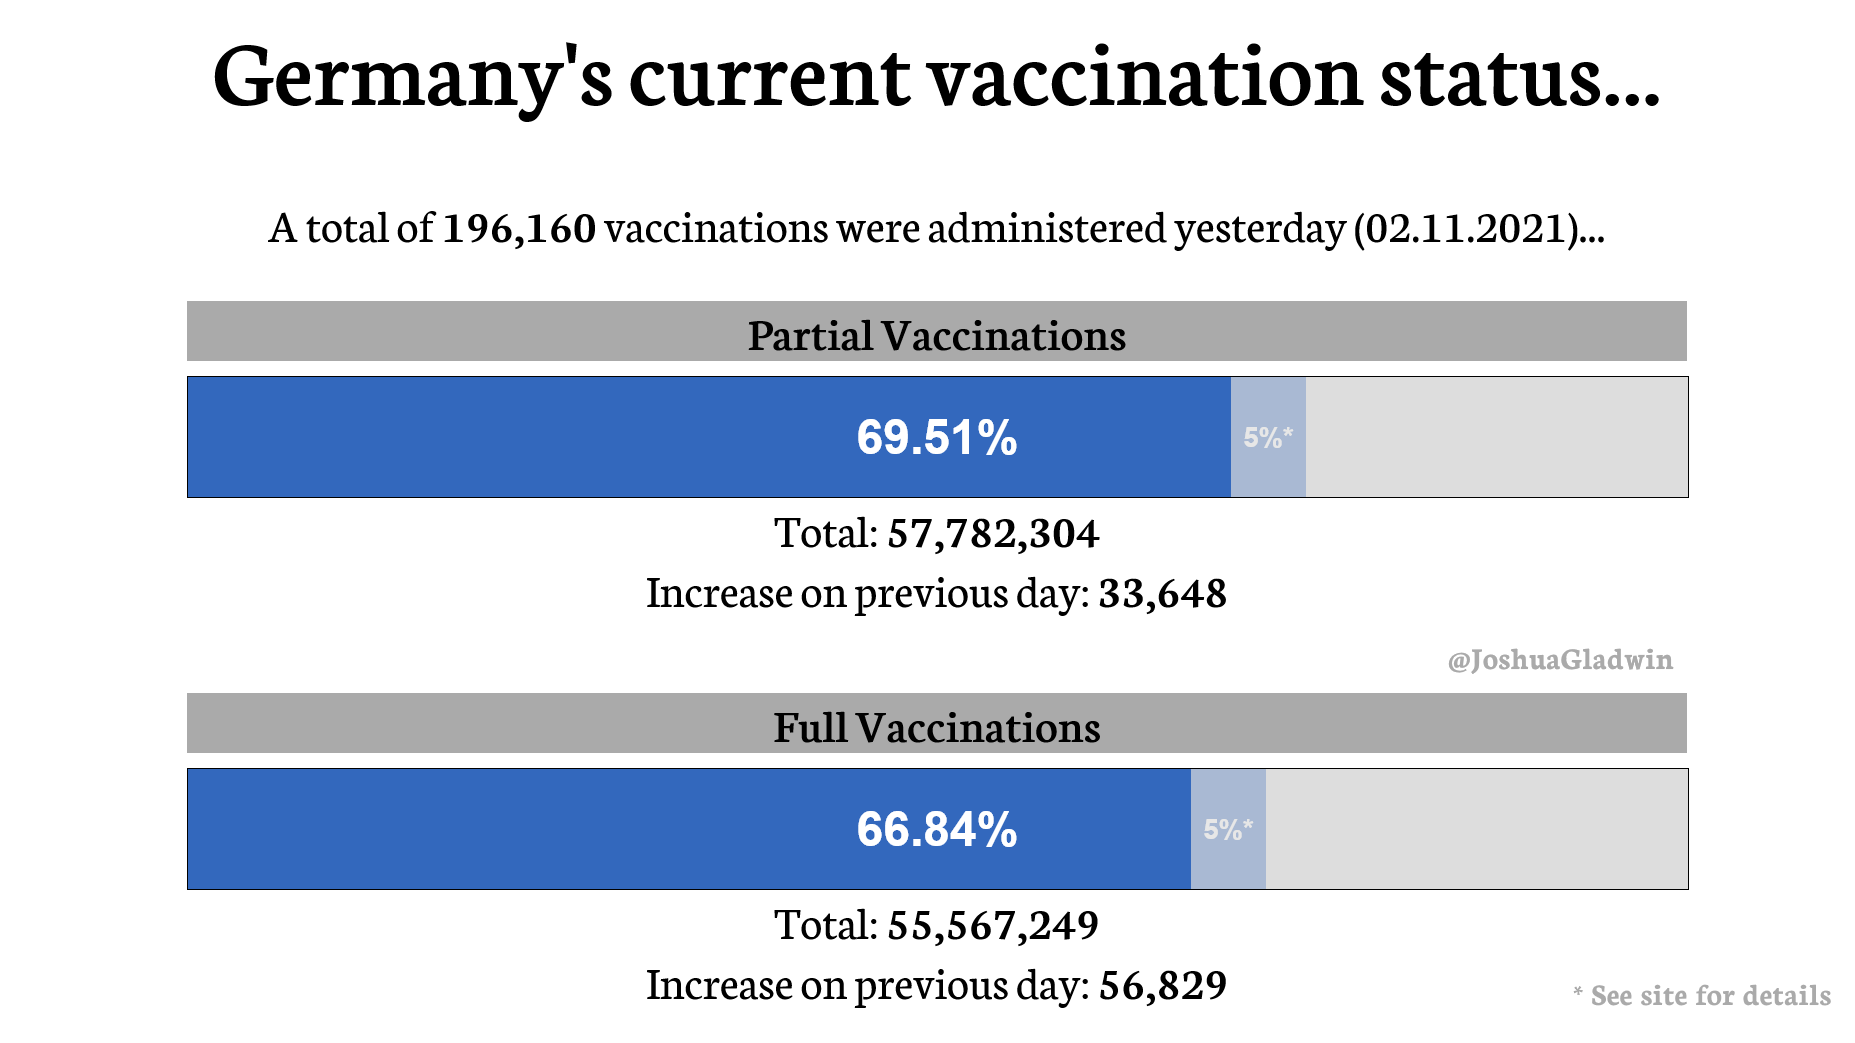 Two blue progress bars, showing the percentages of people partially and fully vaccinated in Germany.